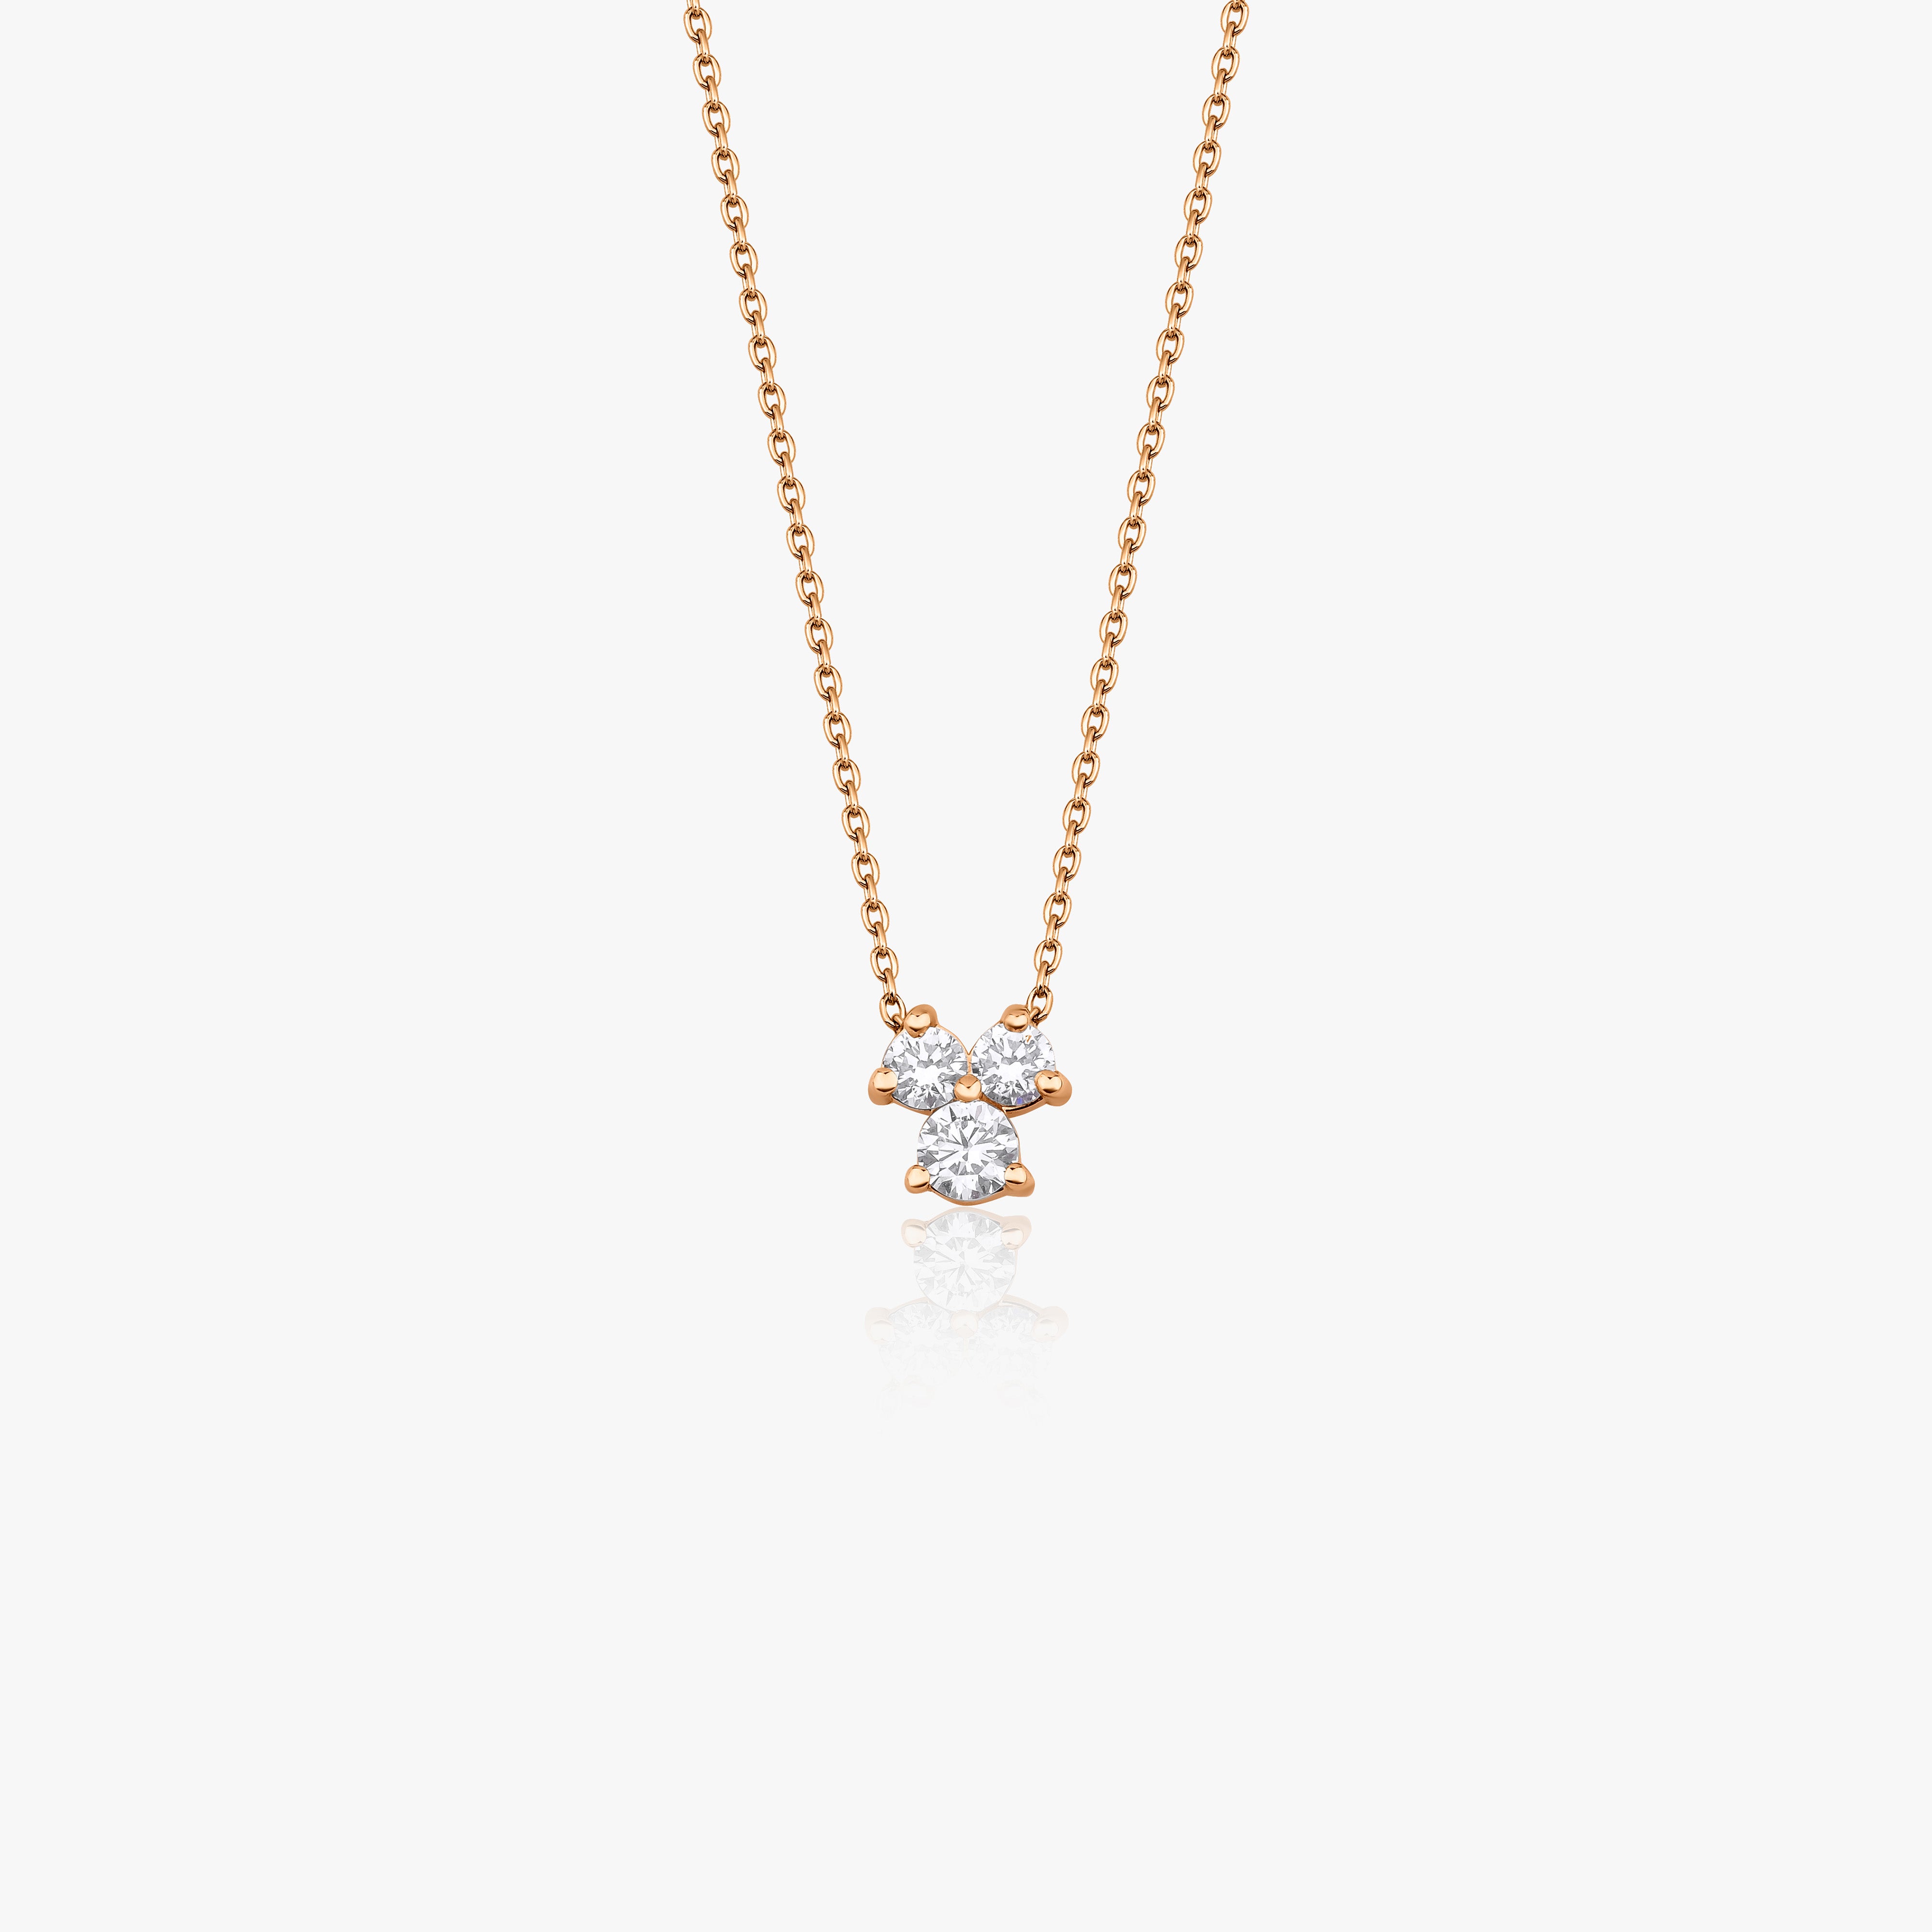 Trio Diamond Necklace Available in 14K and 18K Gold